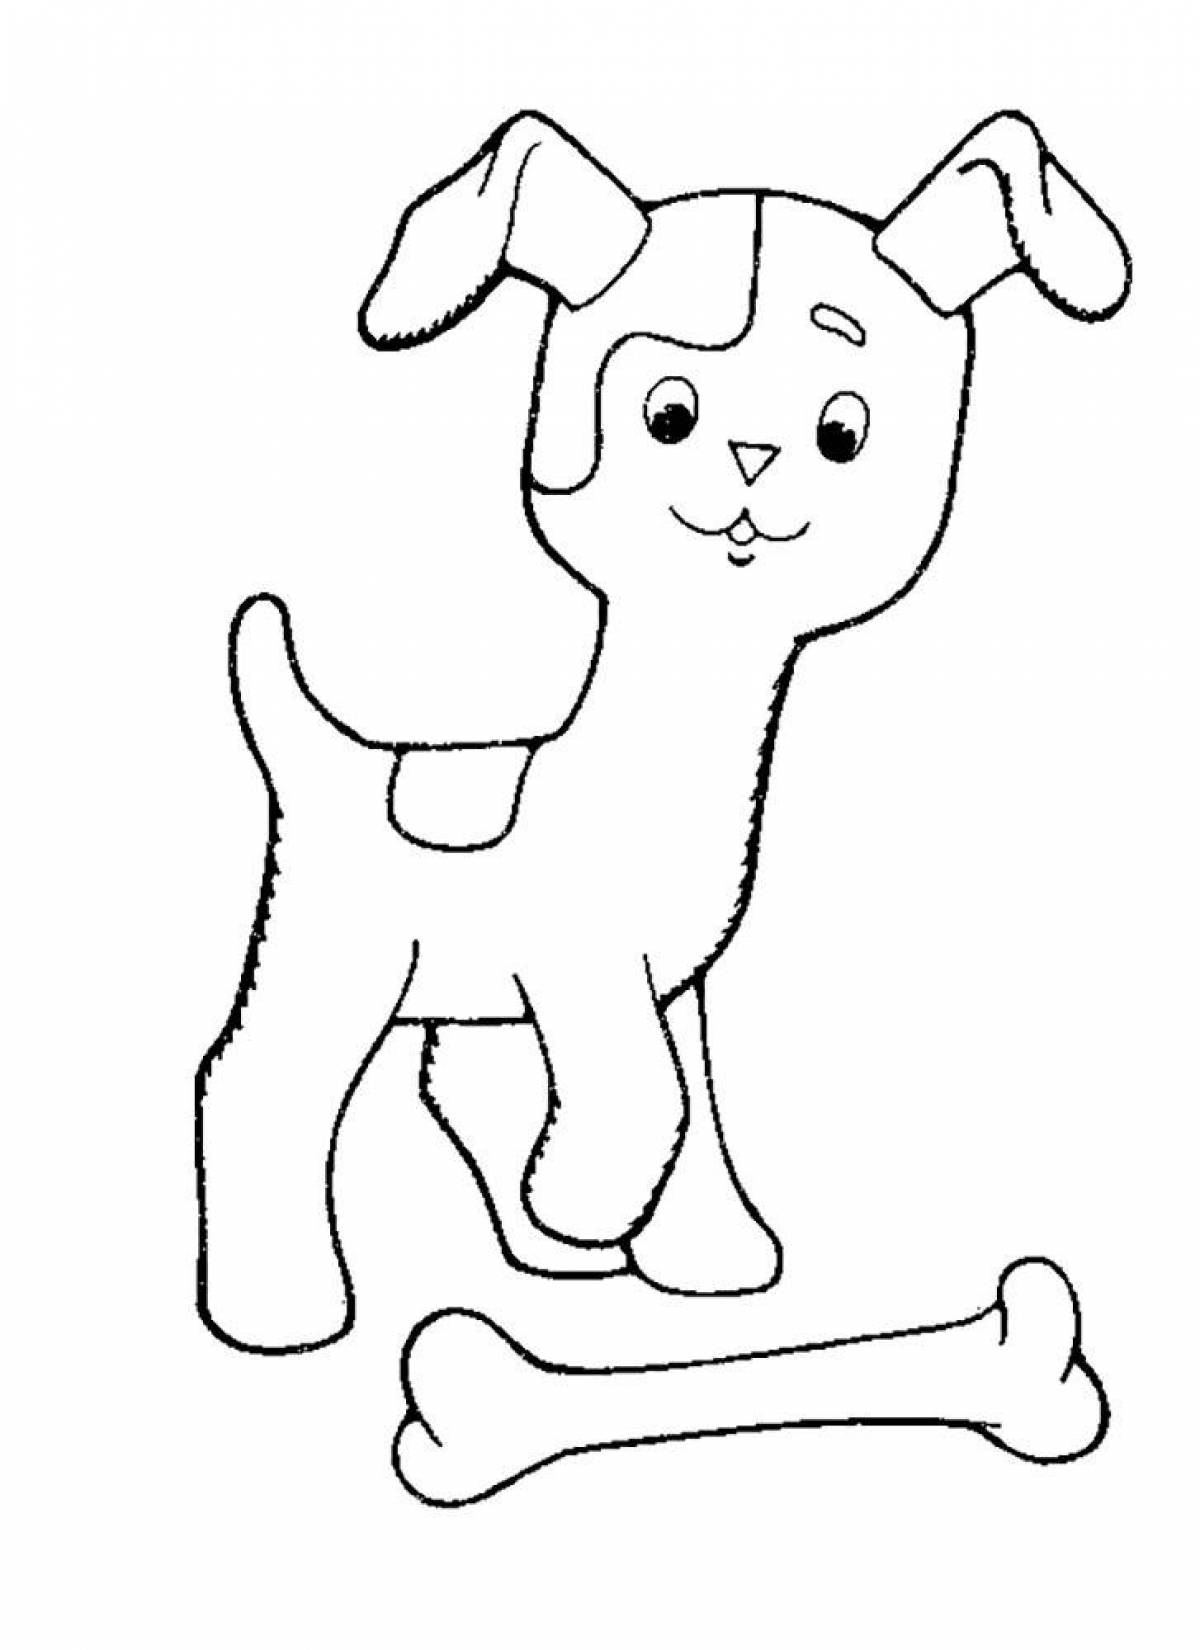 Bubble kitten coloring page